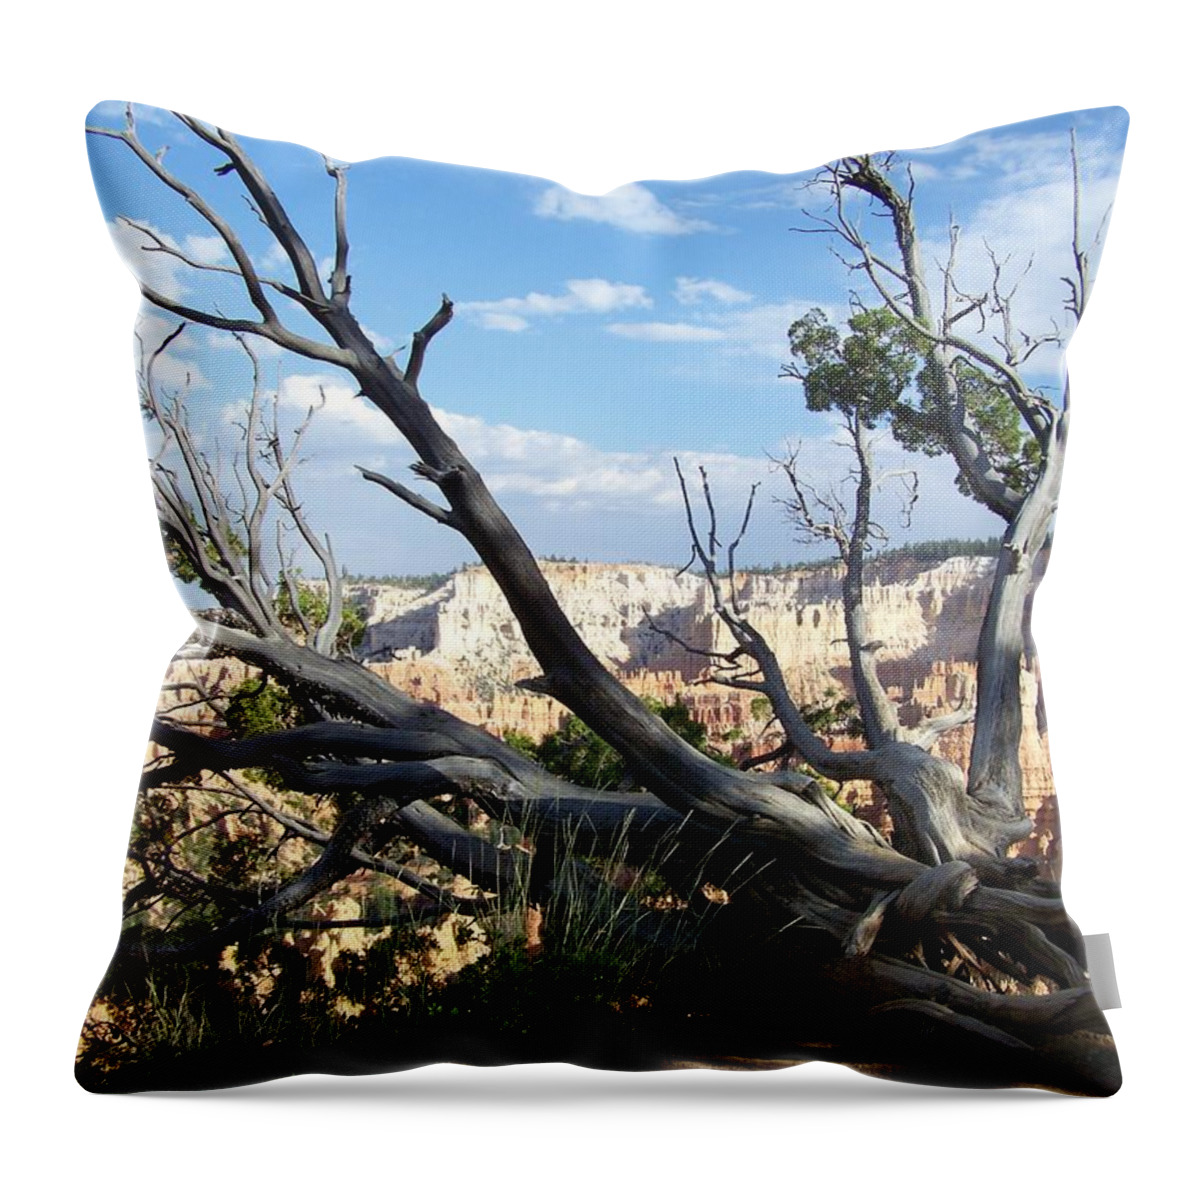 Bryce Canyon Throw Pillow featuring the photograph Bryce Canyon by Dany Lison